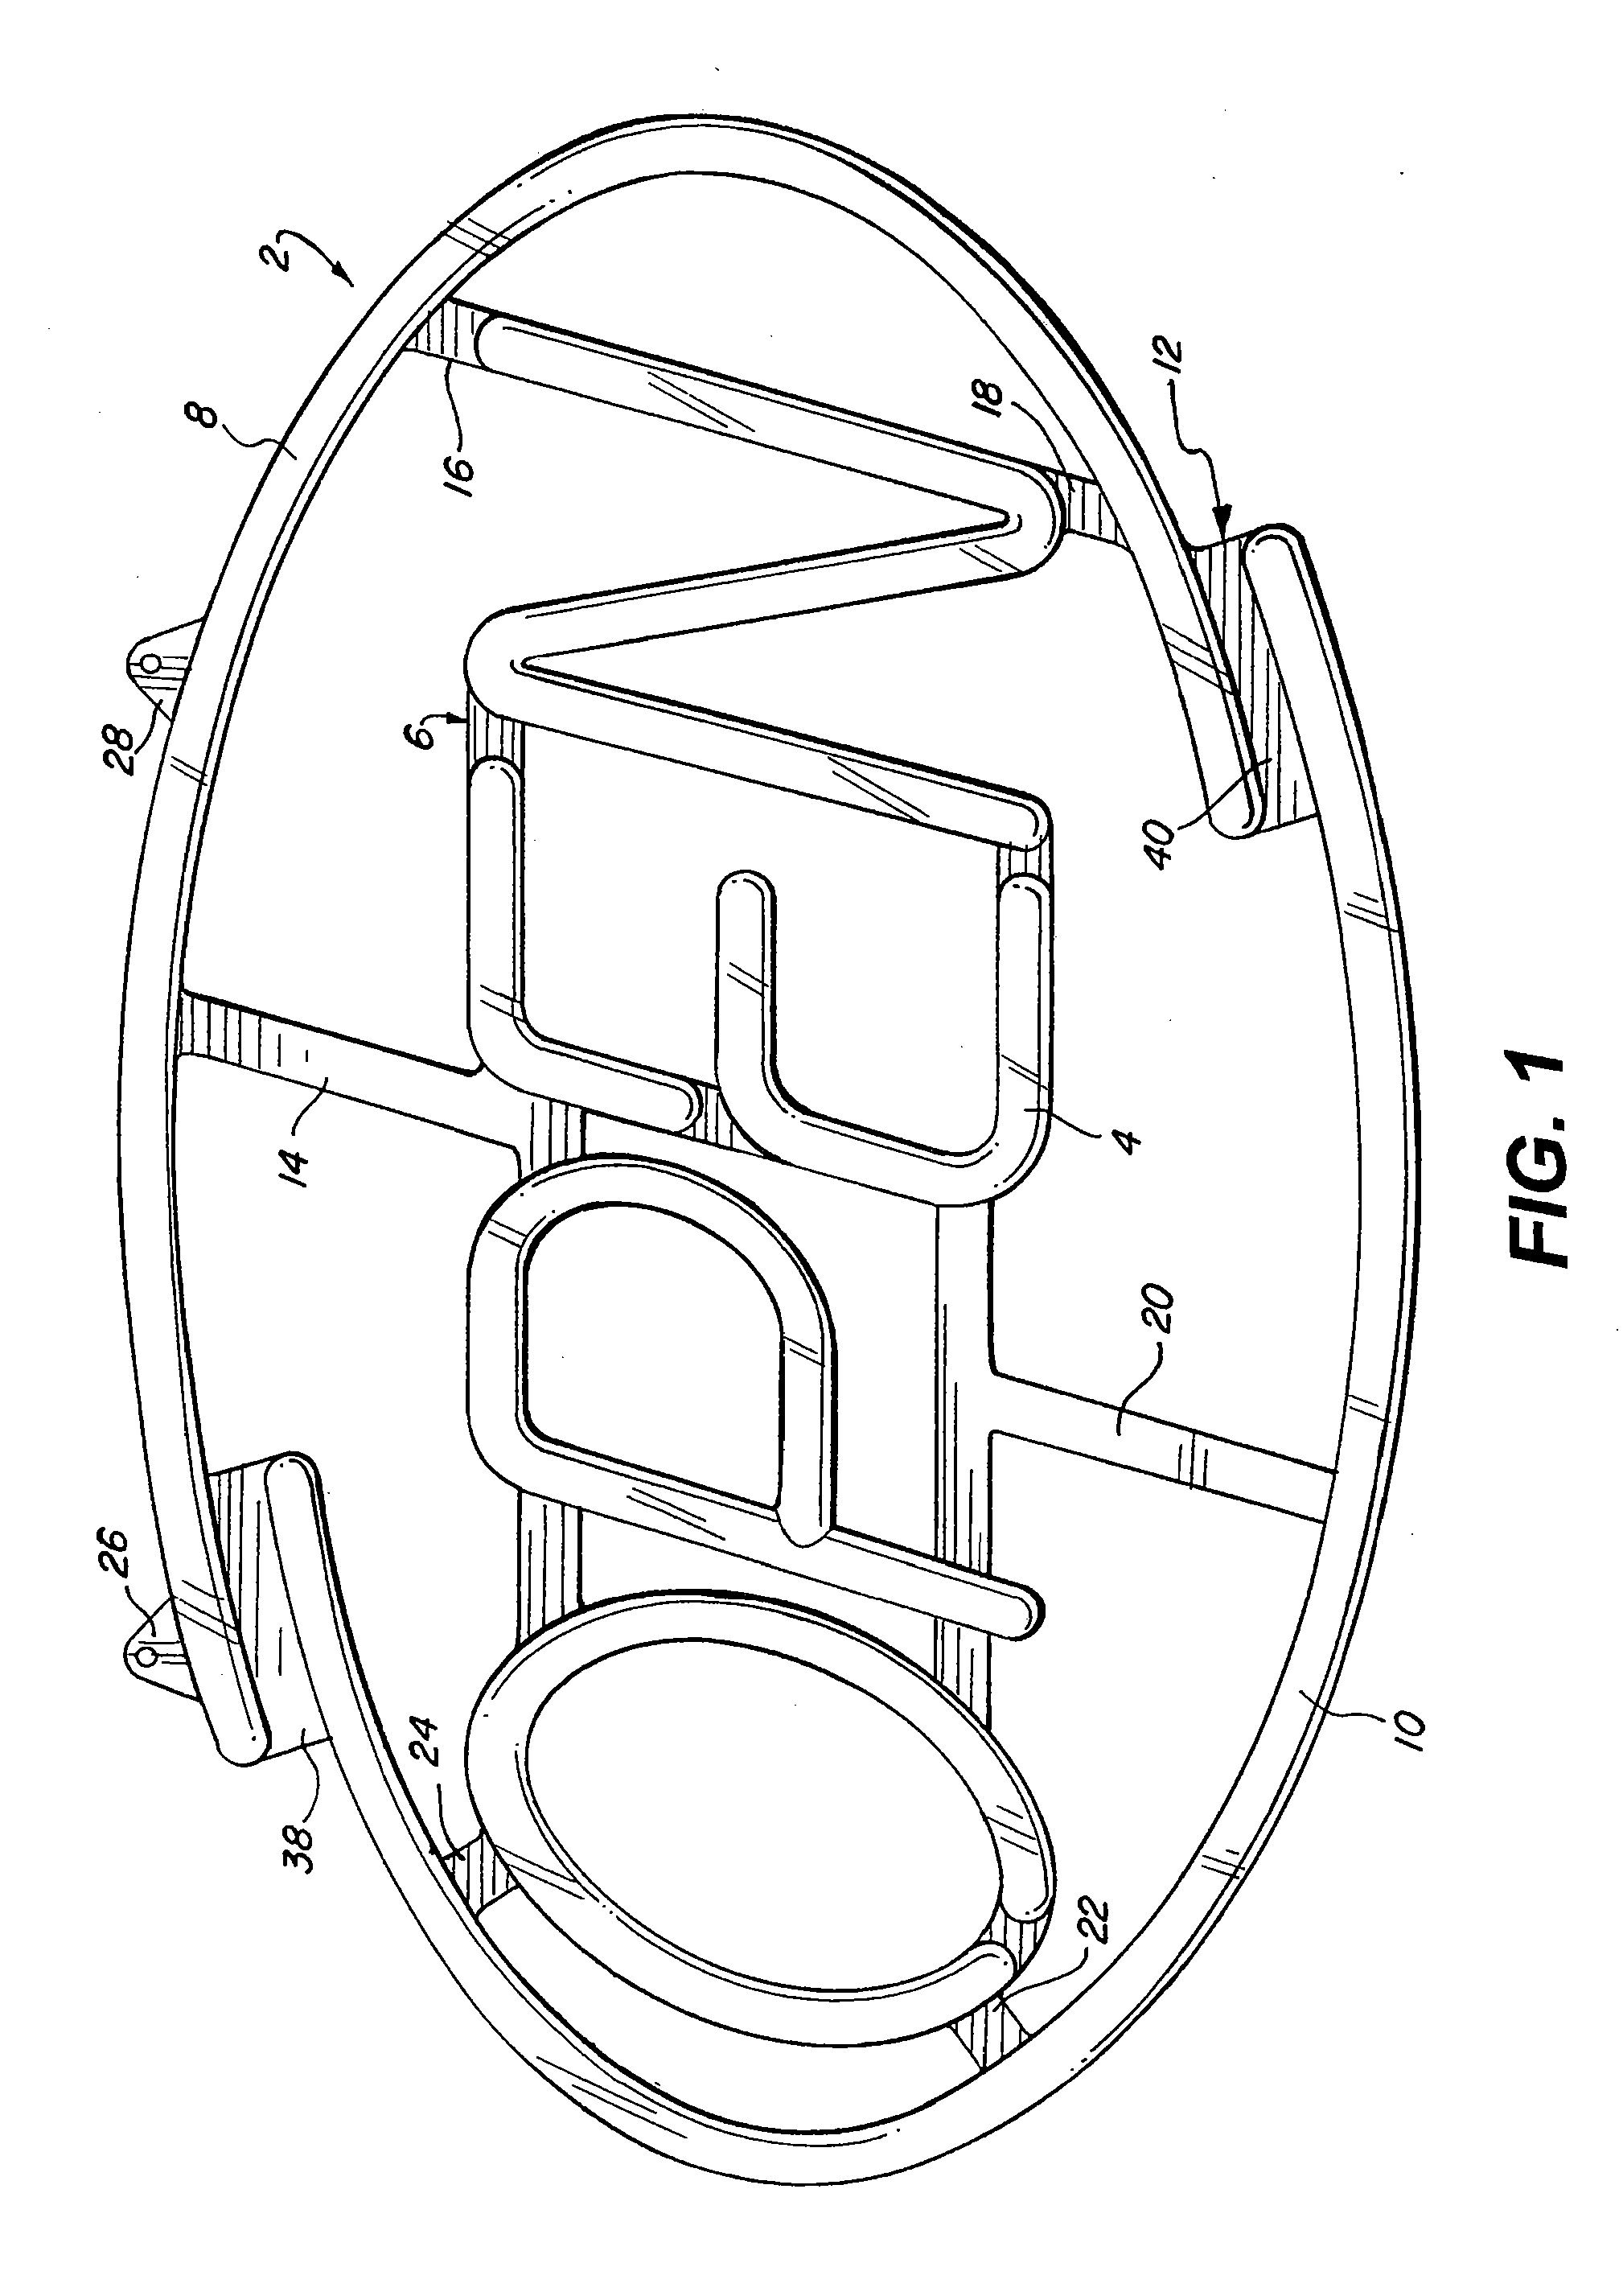 Method and apparatus for providing a simulated neon sign